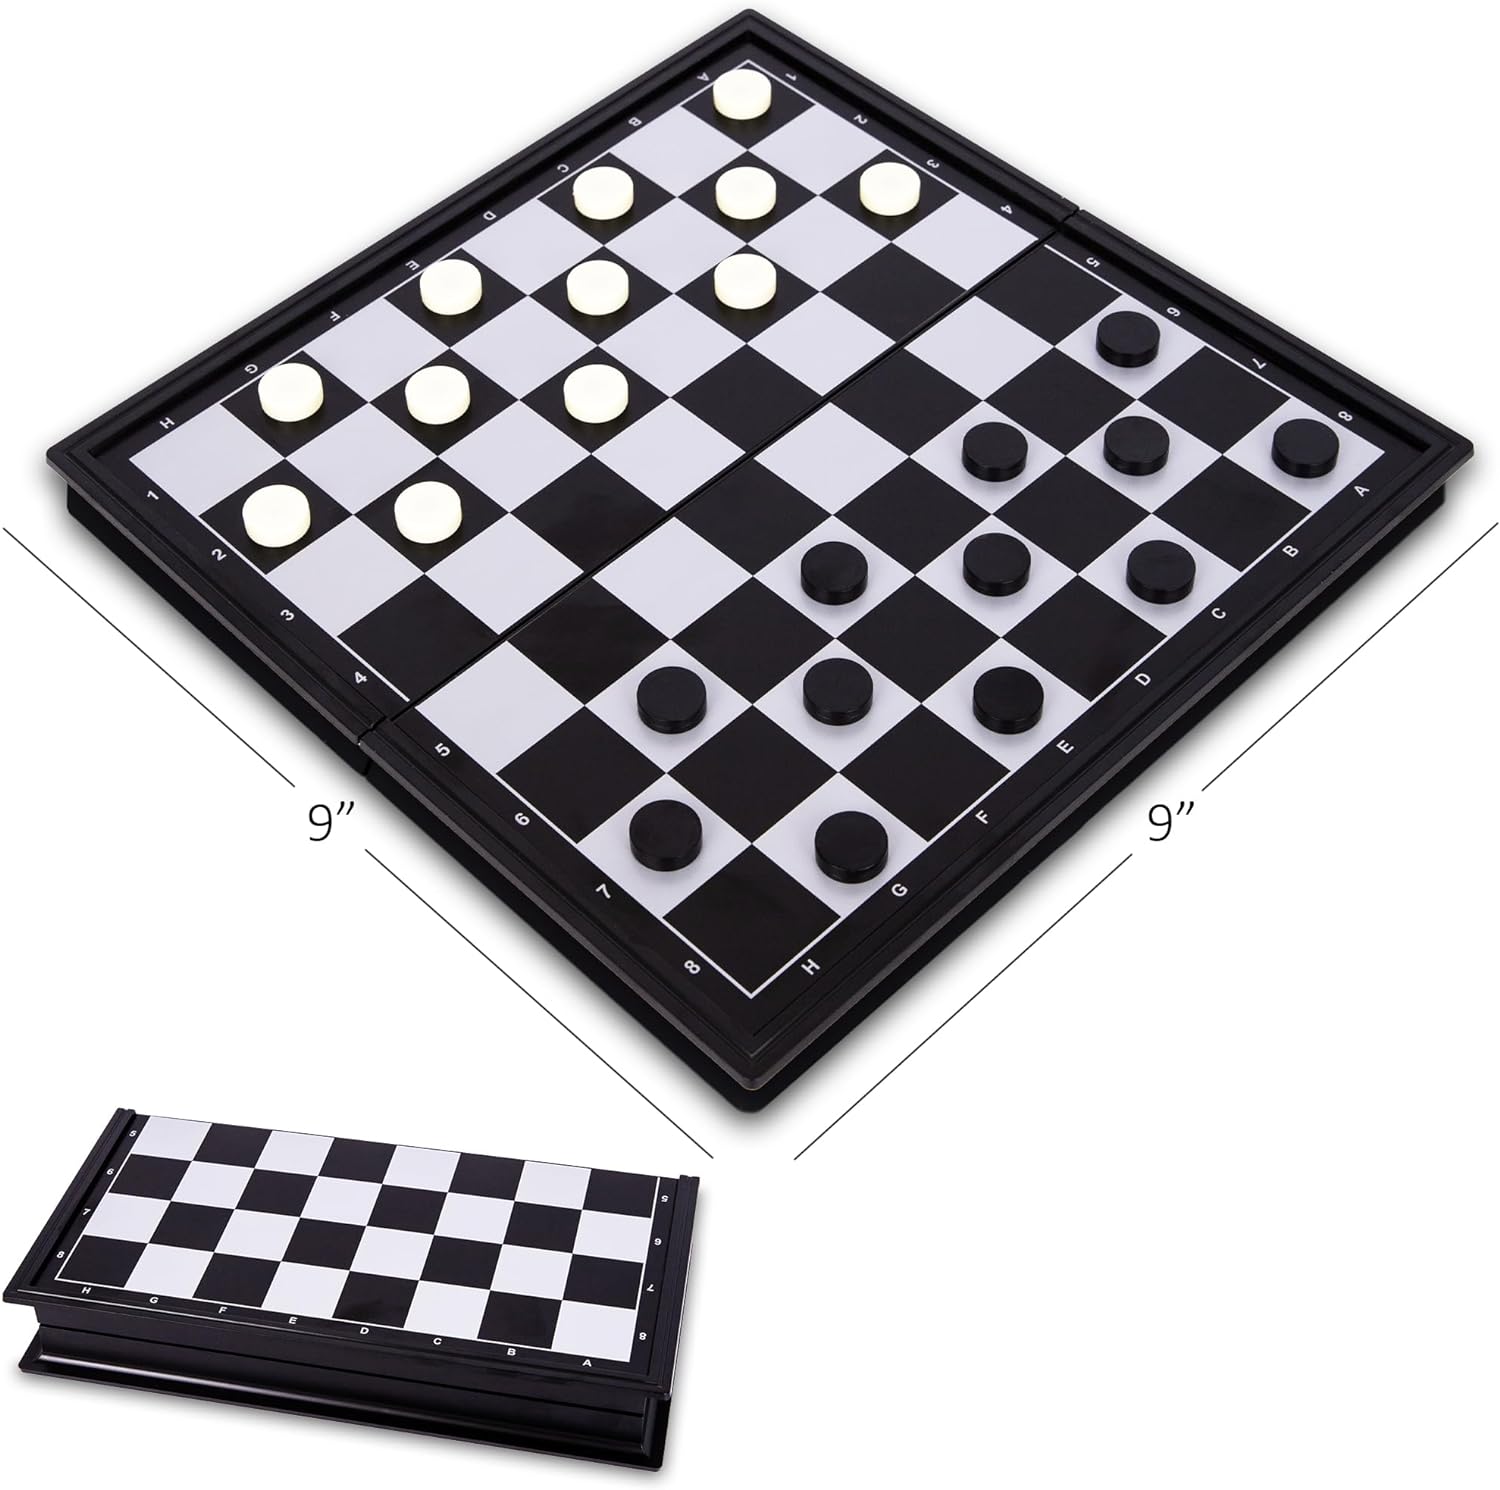 Gamie 3 in 1 Magnetic Travel Chess Set - Portable Chess, Checkers, Backgammon Set - 9 Inch Magnetic Chess Board for Road Trips - Travel Games for Kids and Adults - Gift Idea for Ages 3 and Up